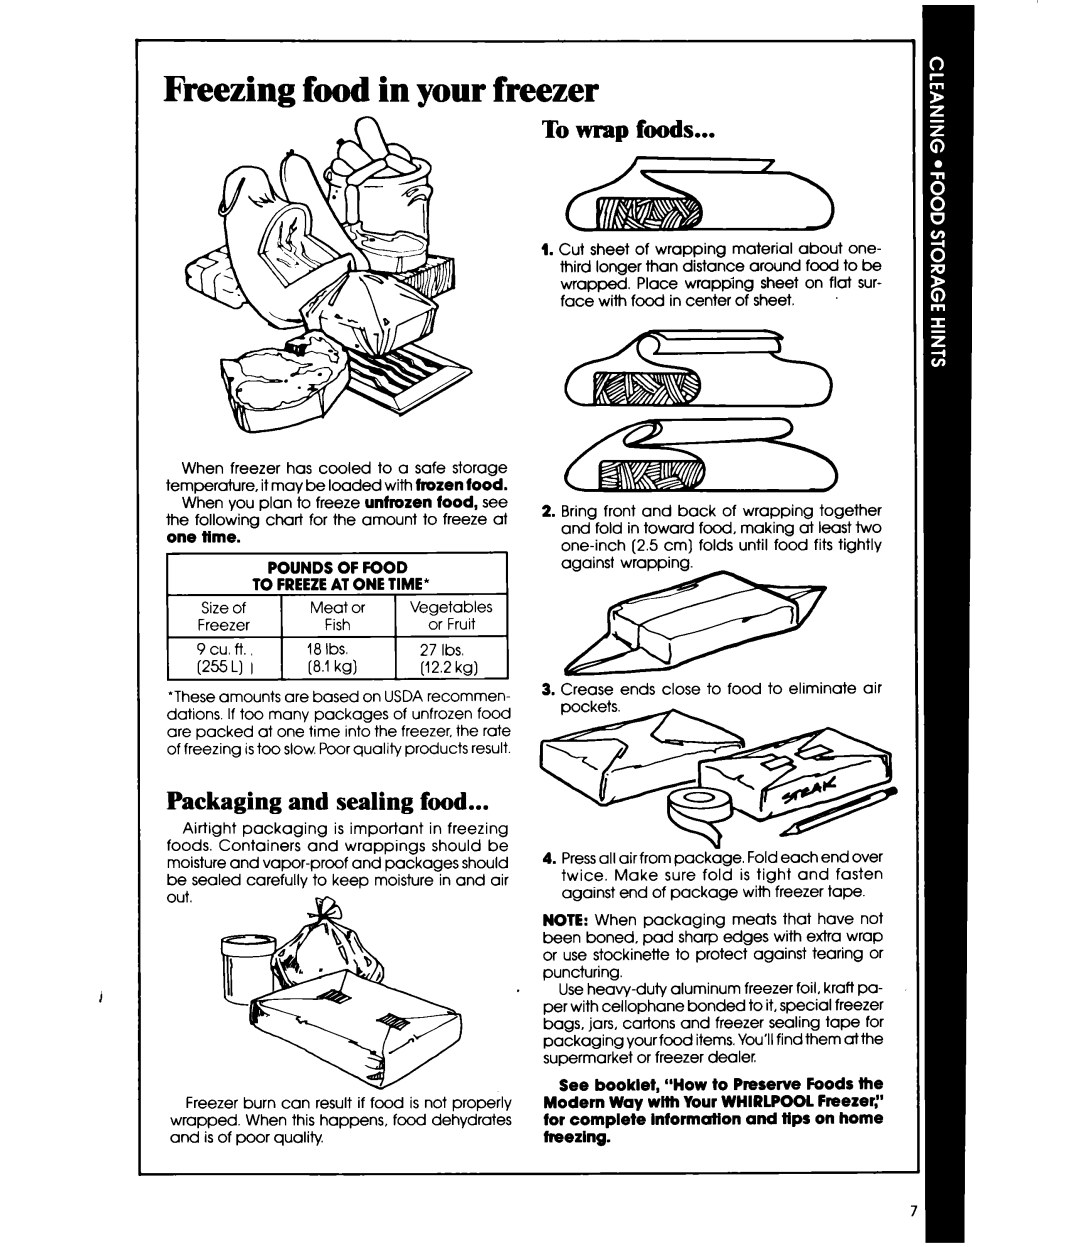 Whirlpool EV090F manual Freezing food in your freezer, To wrap foods, Packaging and sealing food 